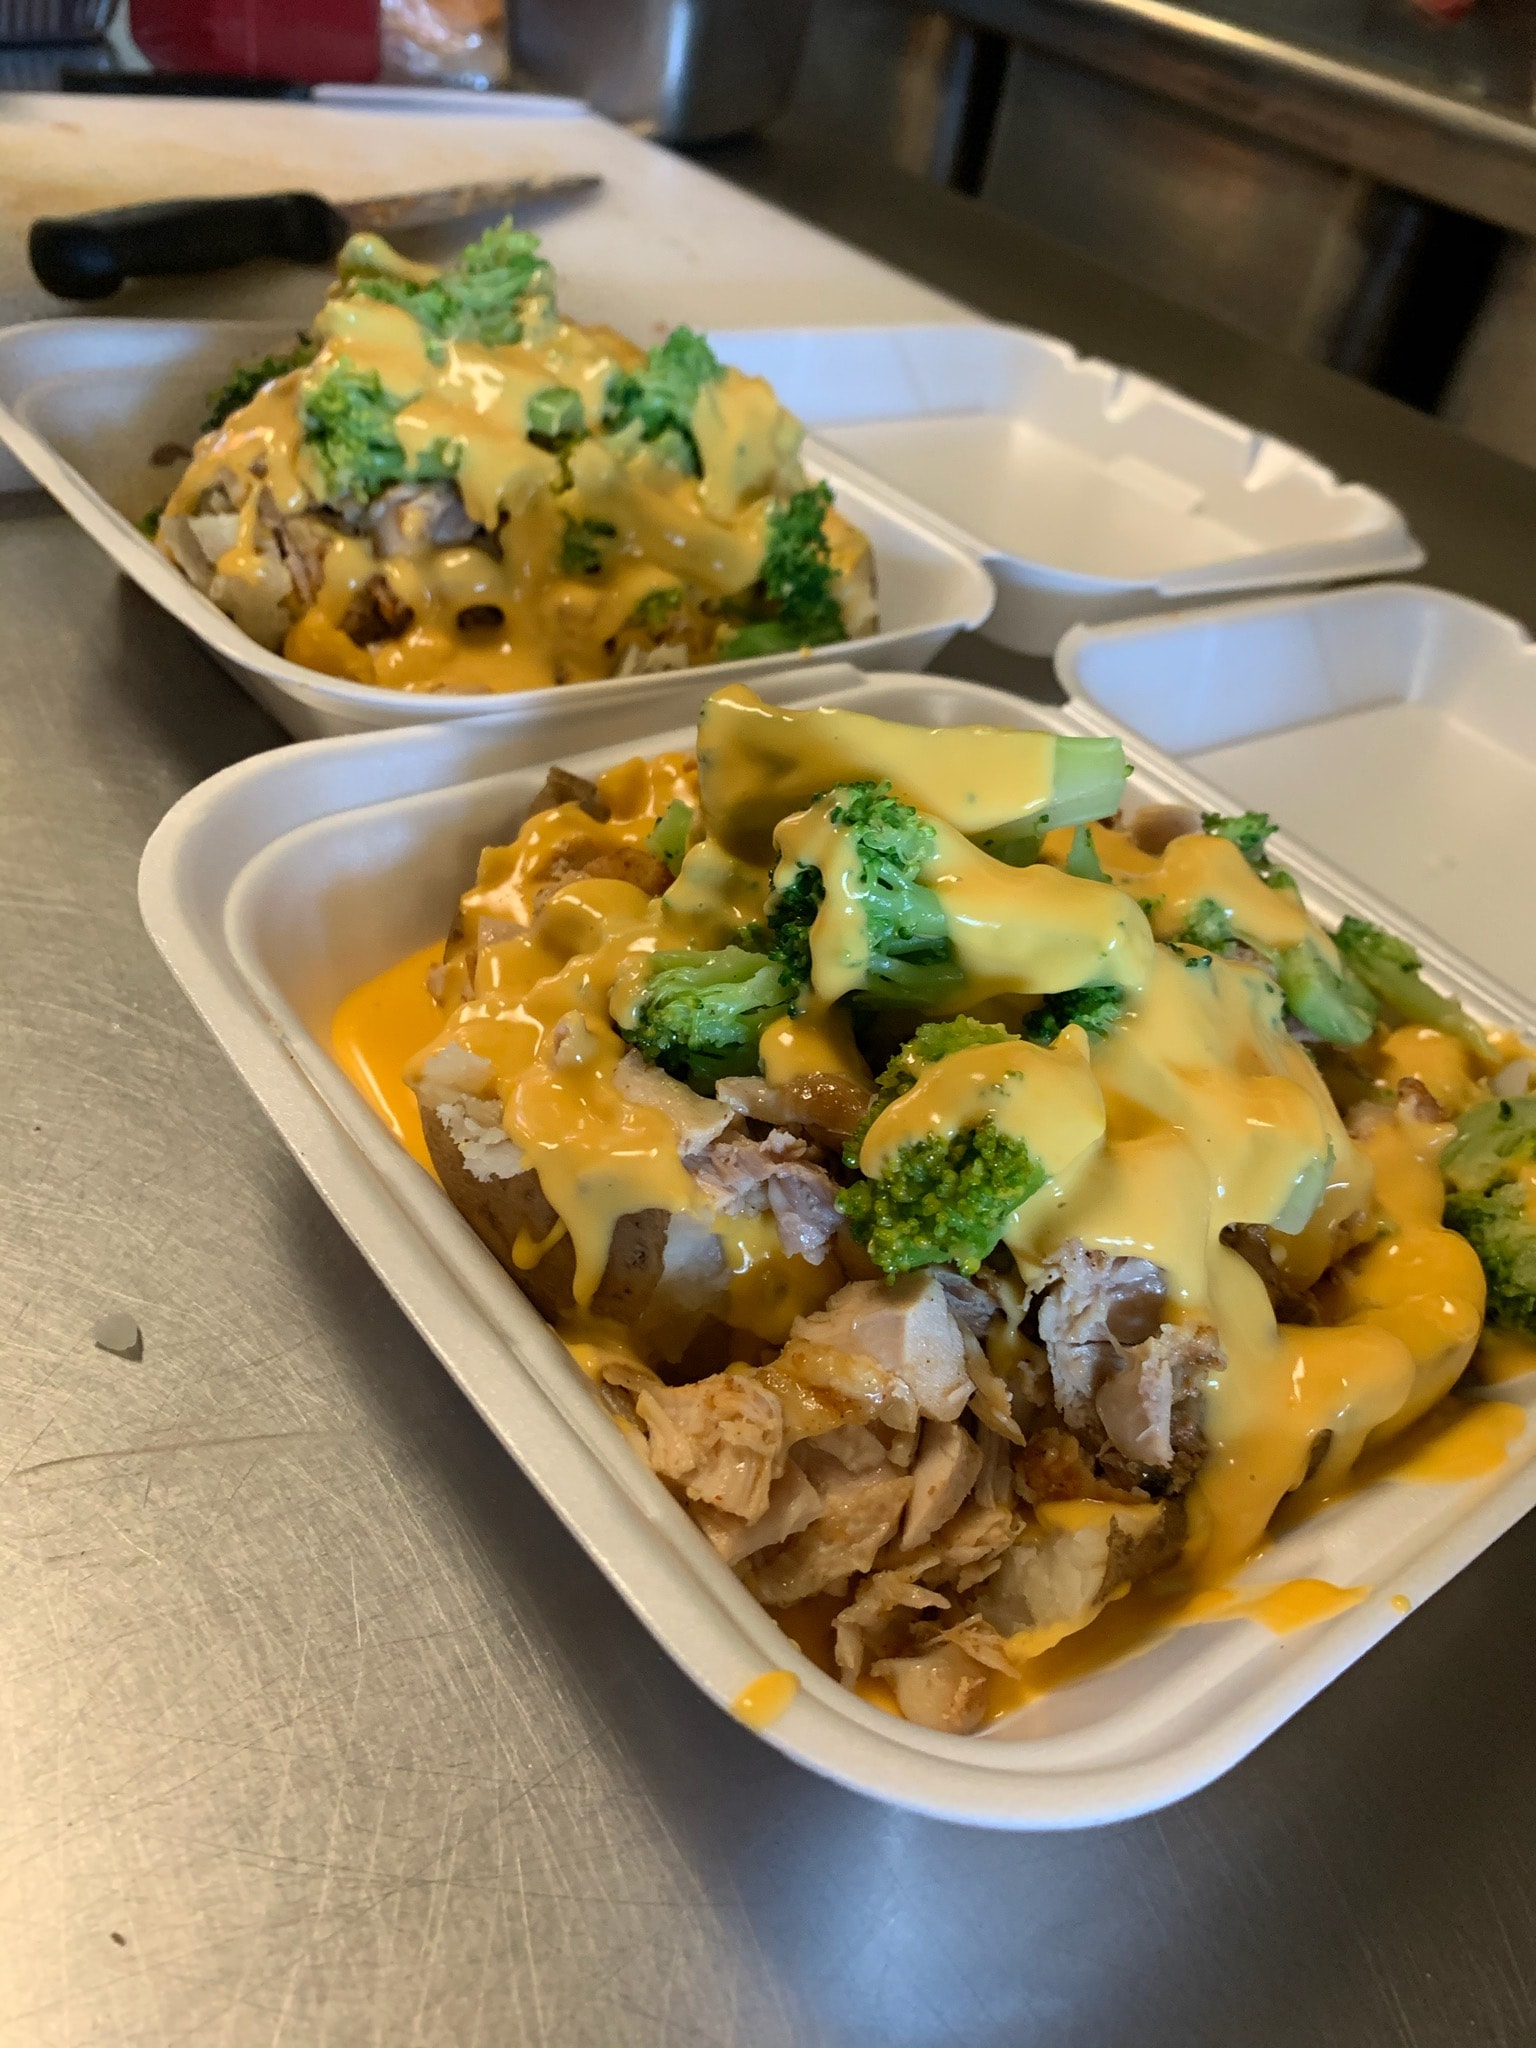 An entire container is full of baked potato covered with cheese, broccoli, and smoked chicken. Photo from Dis N' Dat BBQ Facebook page.